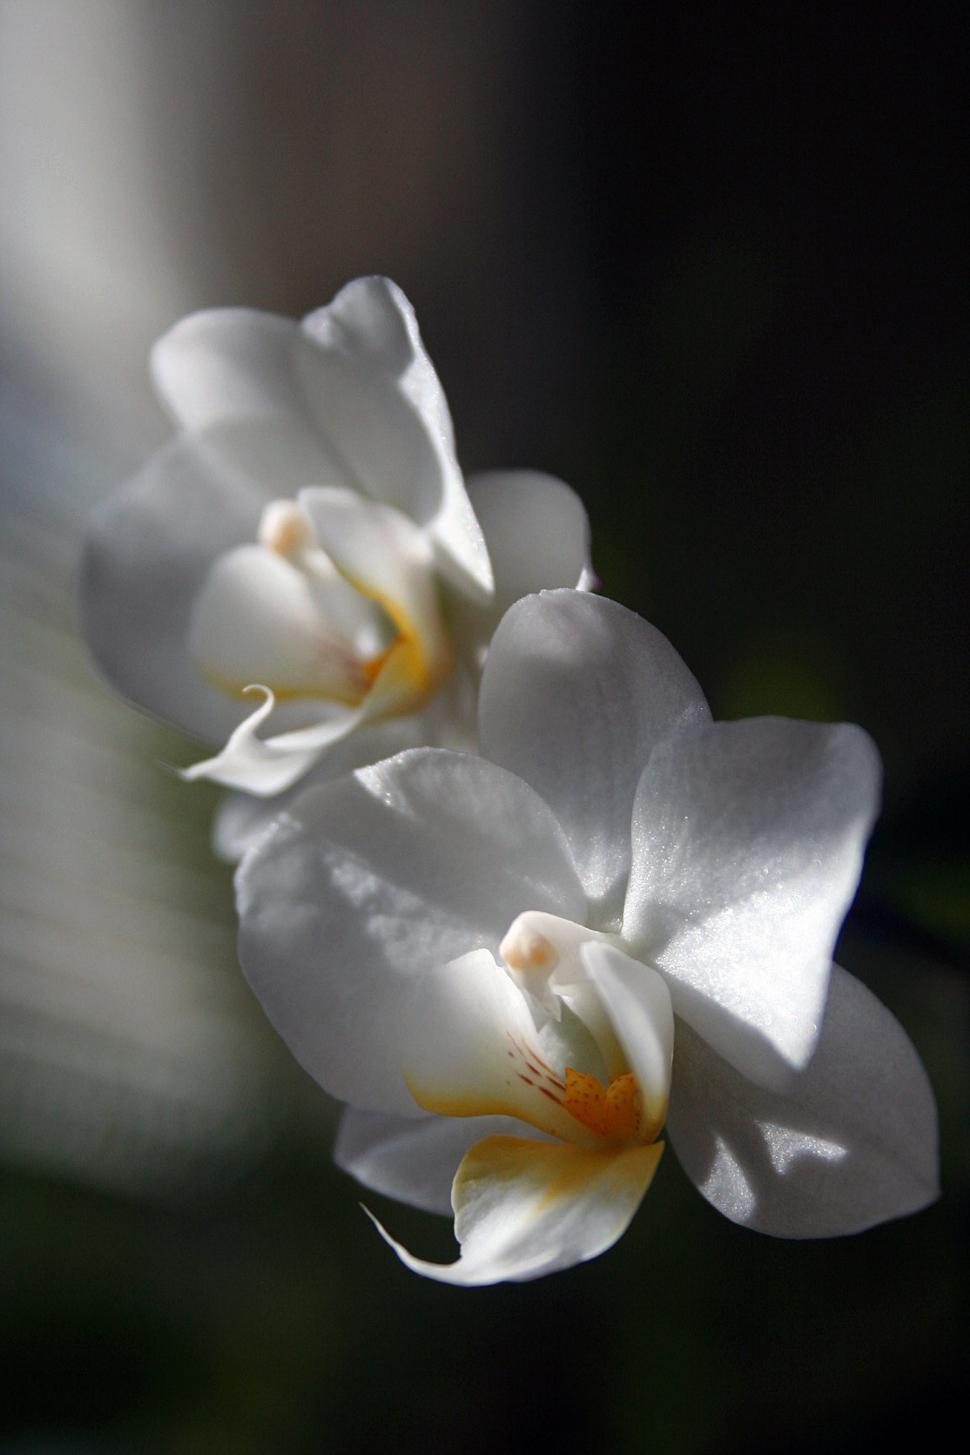 Free Image of White Orchid Flowers Against Dark Backdrop 